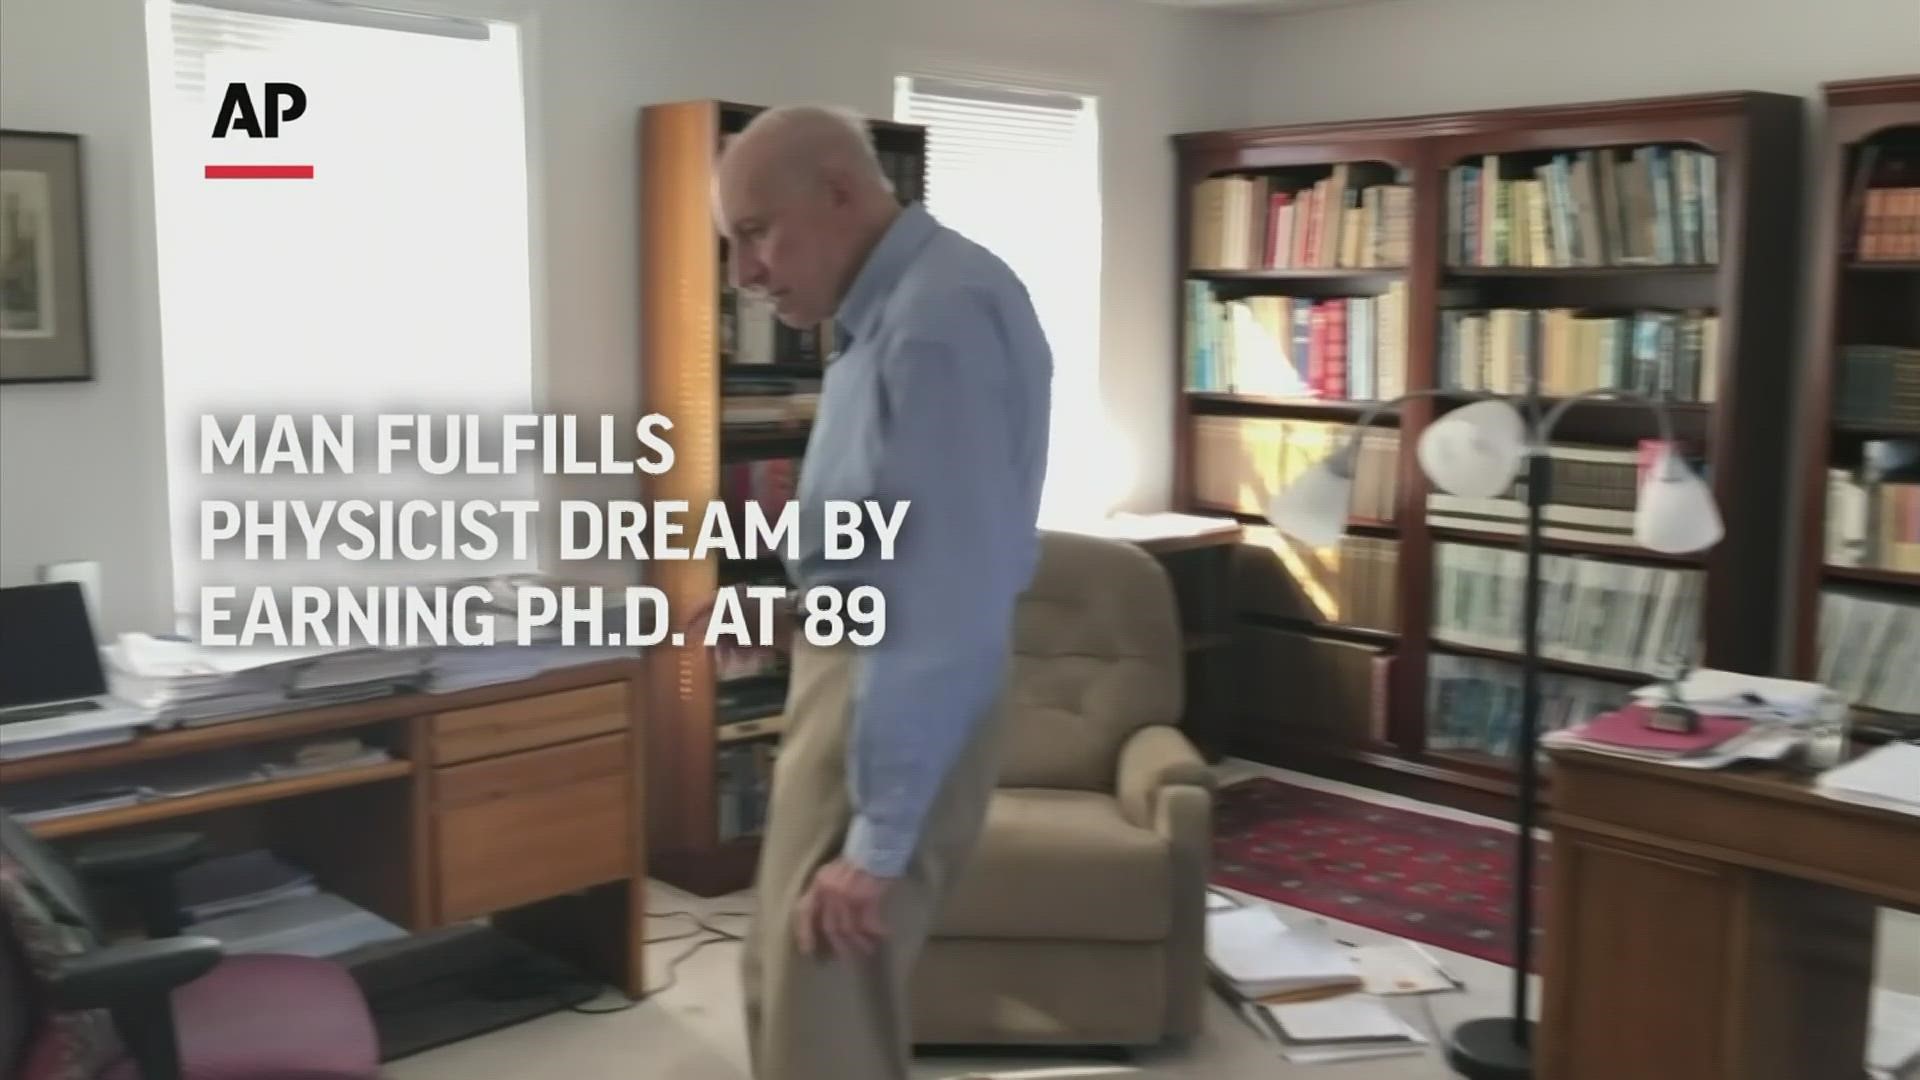 Manfred Steiner always wanted to study physics. So at 89, he followed his dream.